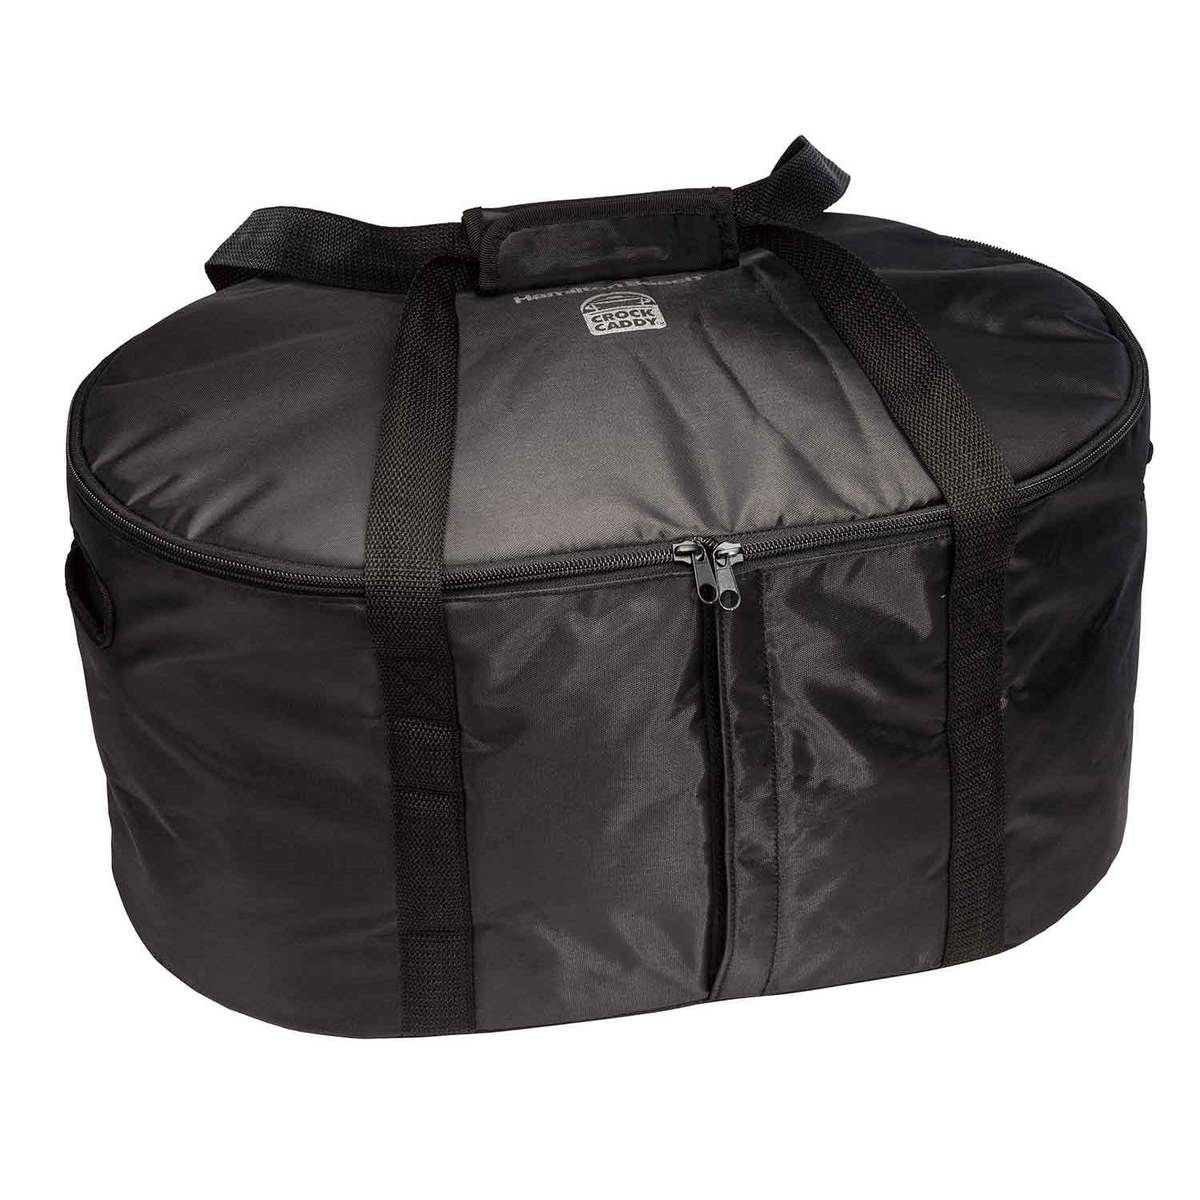 Crock Caddy™ Insulated Slow Cooker Bag (33002)